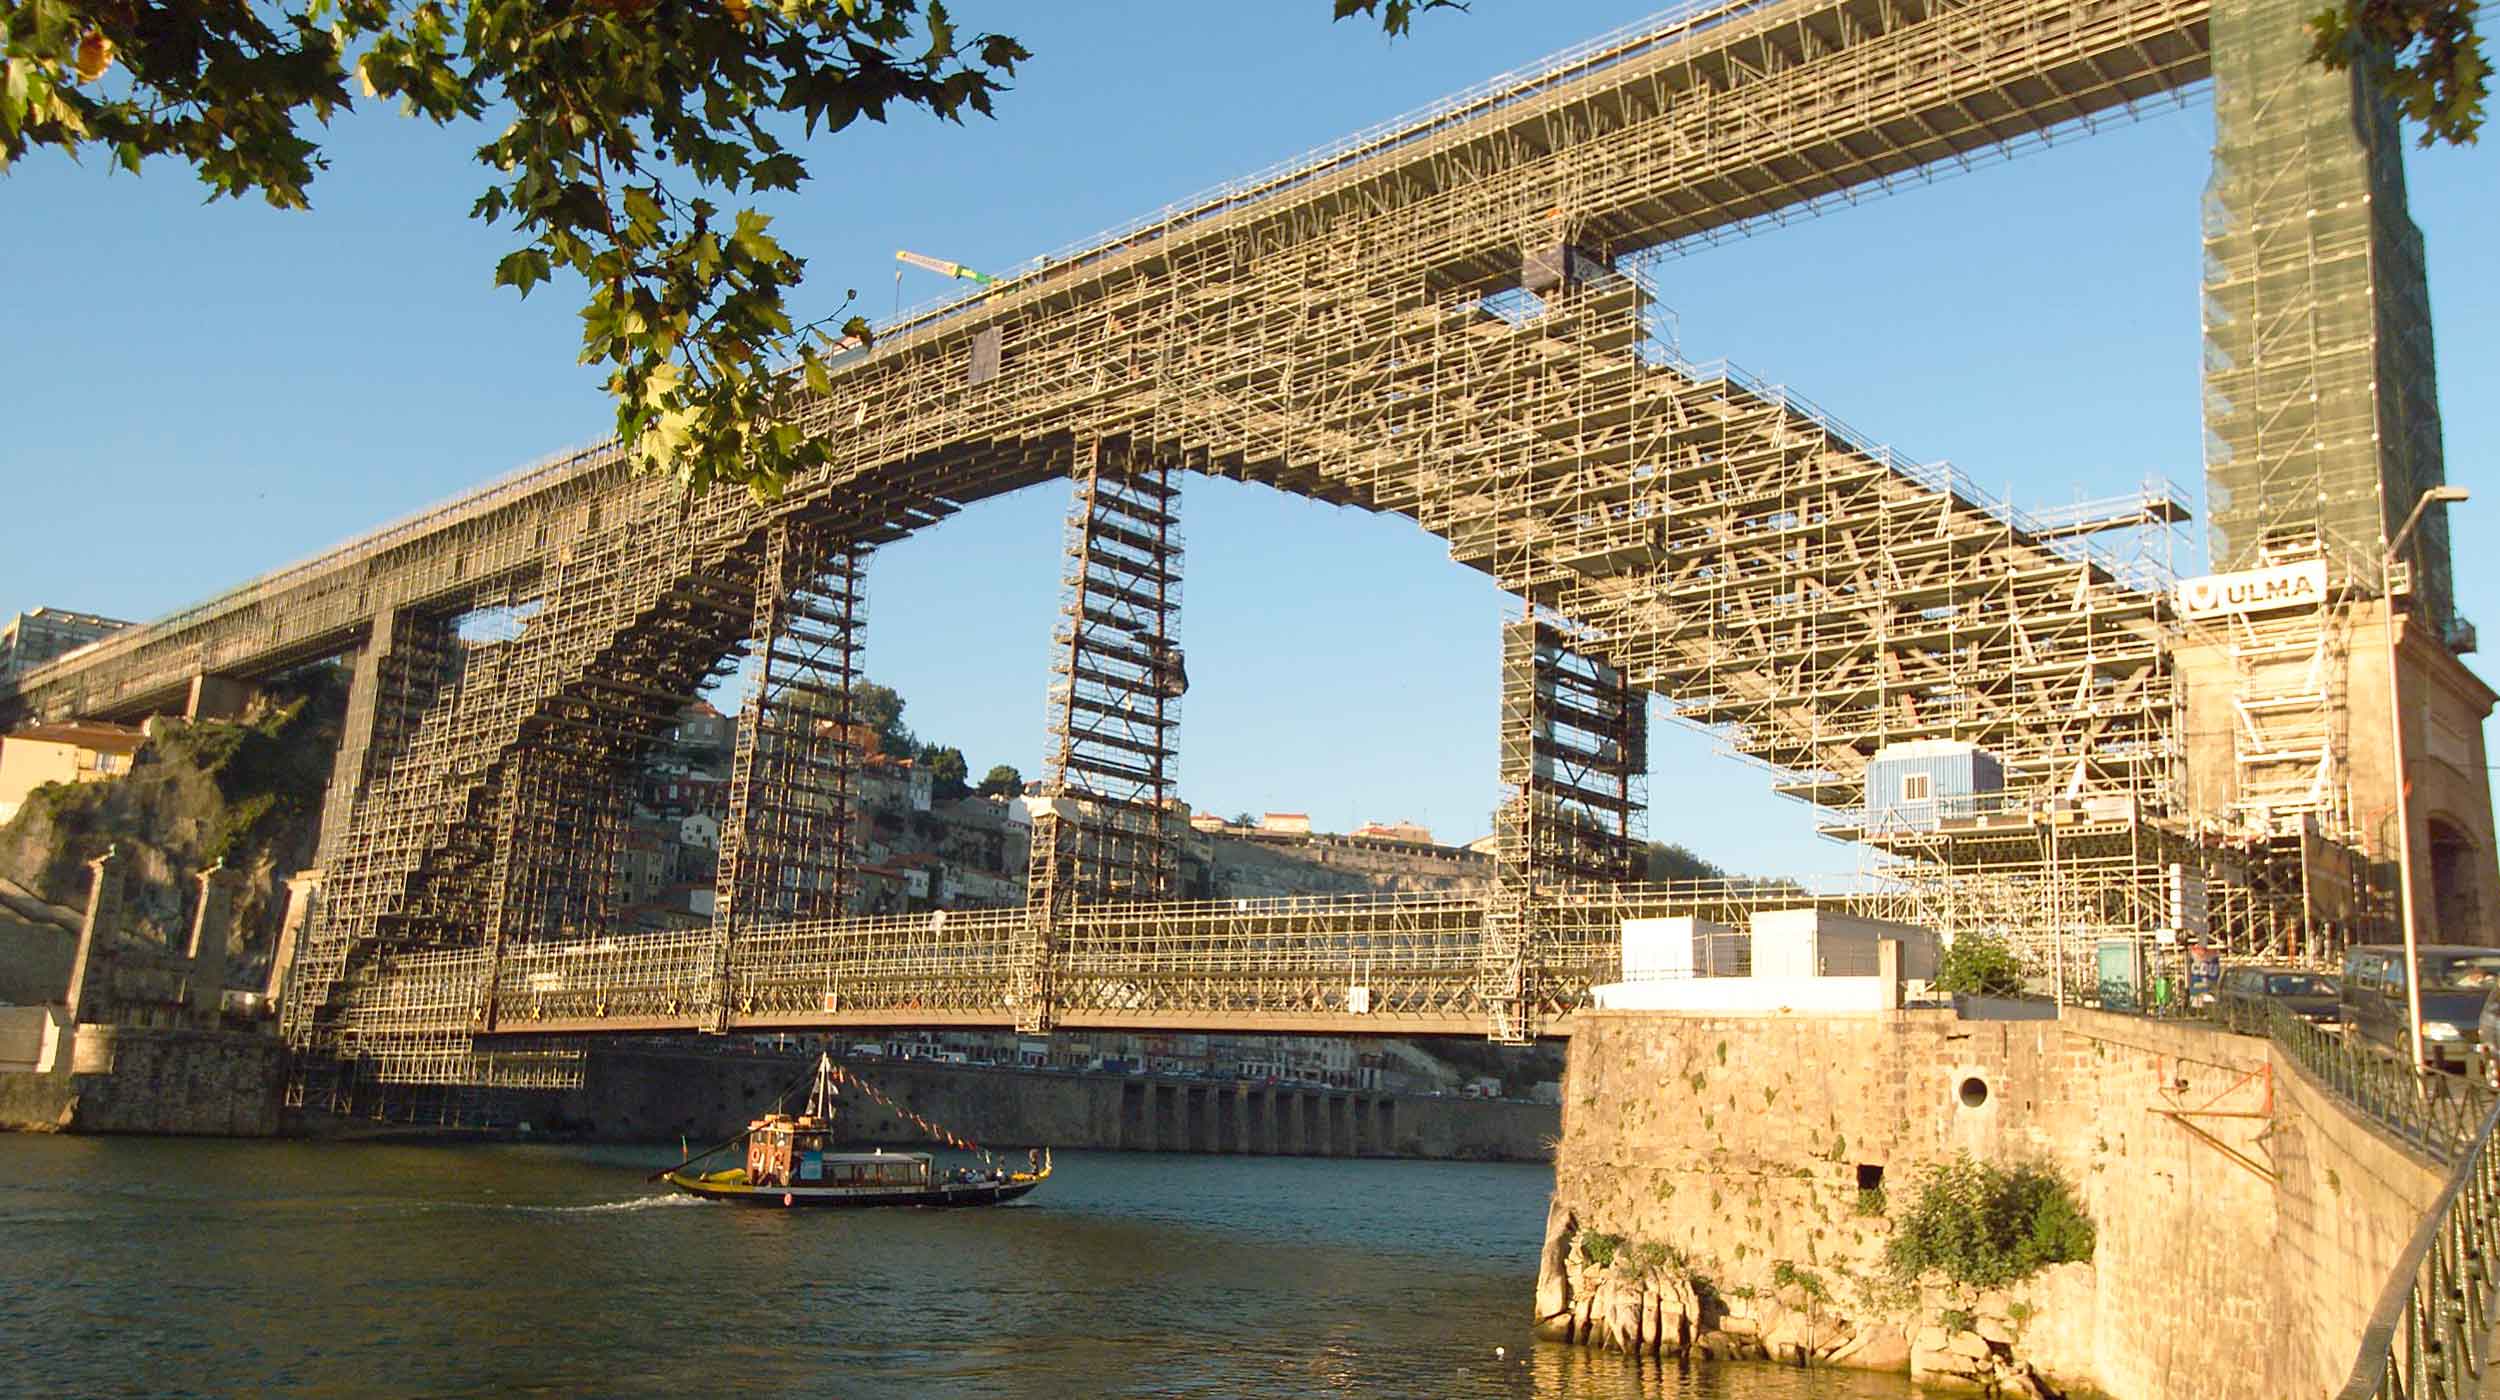 Built over the Duero River, this is one of the most attractive and impressive bridges in the city.